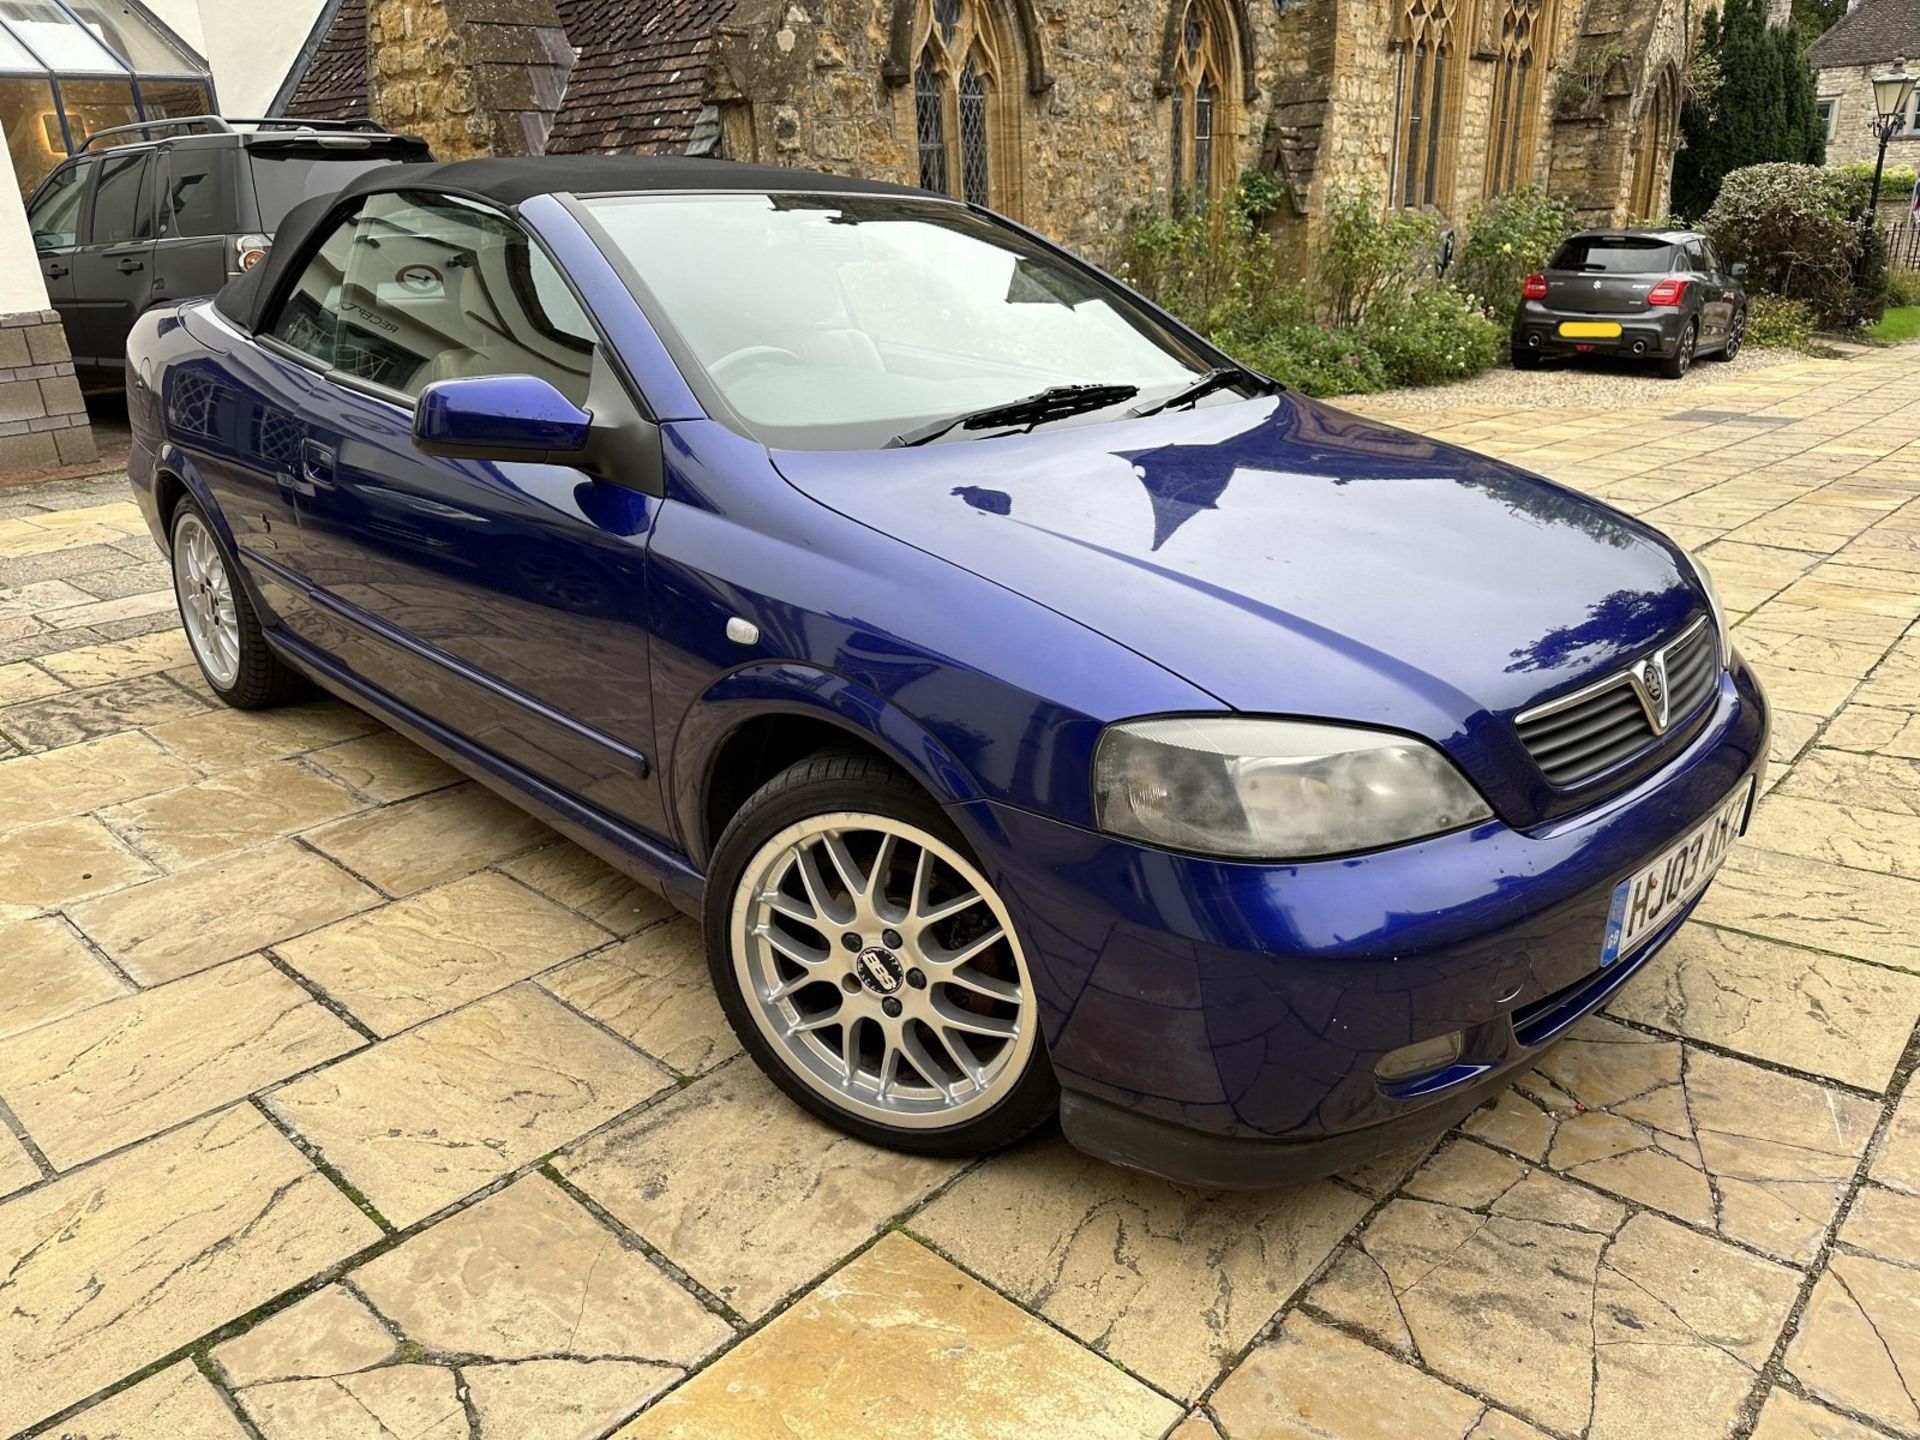 2003 Vauxhall Astra Convertible Special Edition 100 1.8 16V Registration number HJ03 AKZ Blue with a